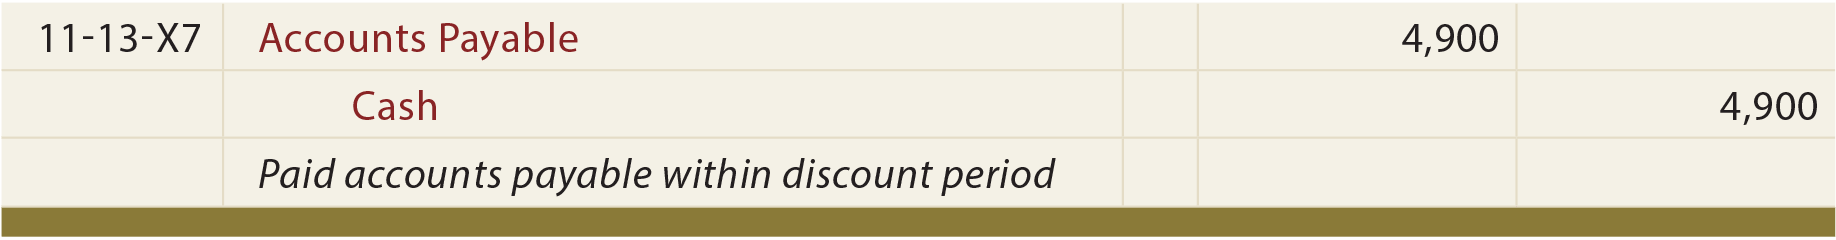 Net Recording of Purchases/Discounts Lost General Journal continued